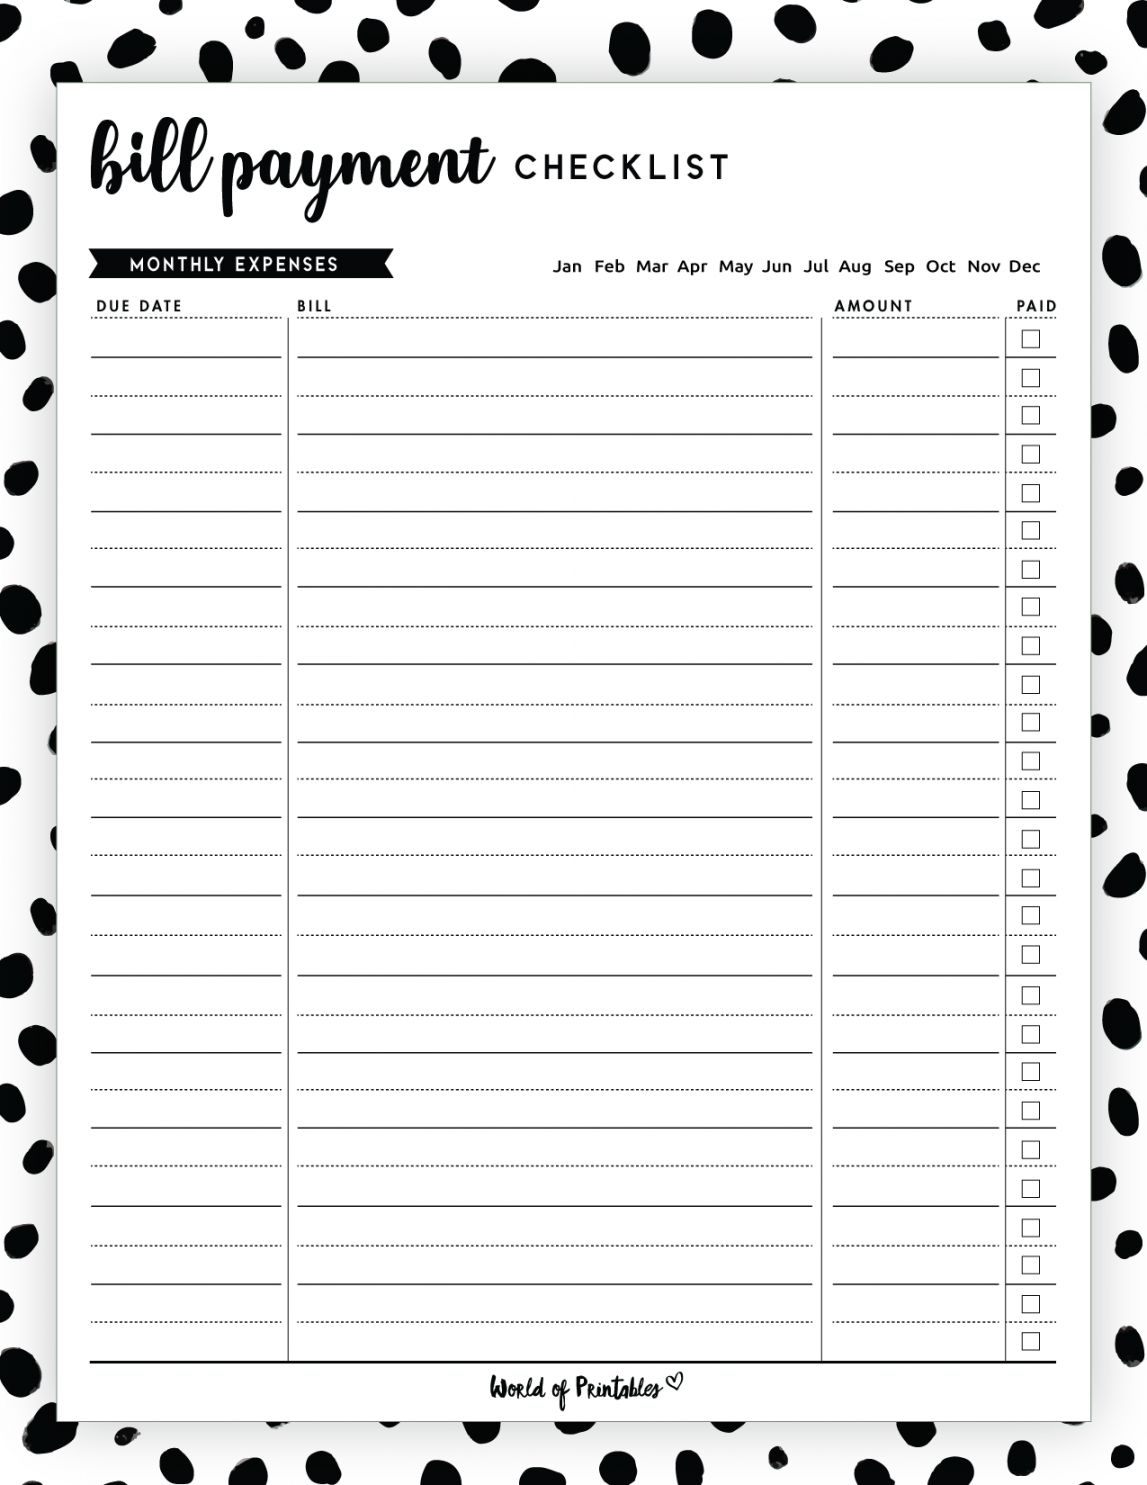 Free Printable Monthly Bill Payment Log - Printable - Free Bill Payment Checklist PDF - World of Printables